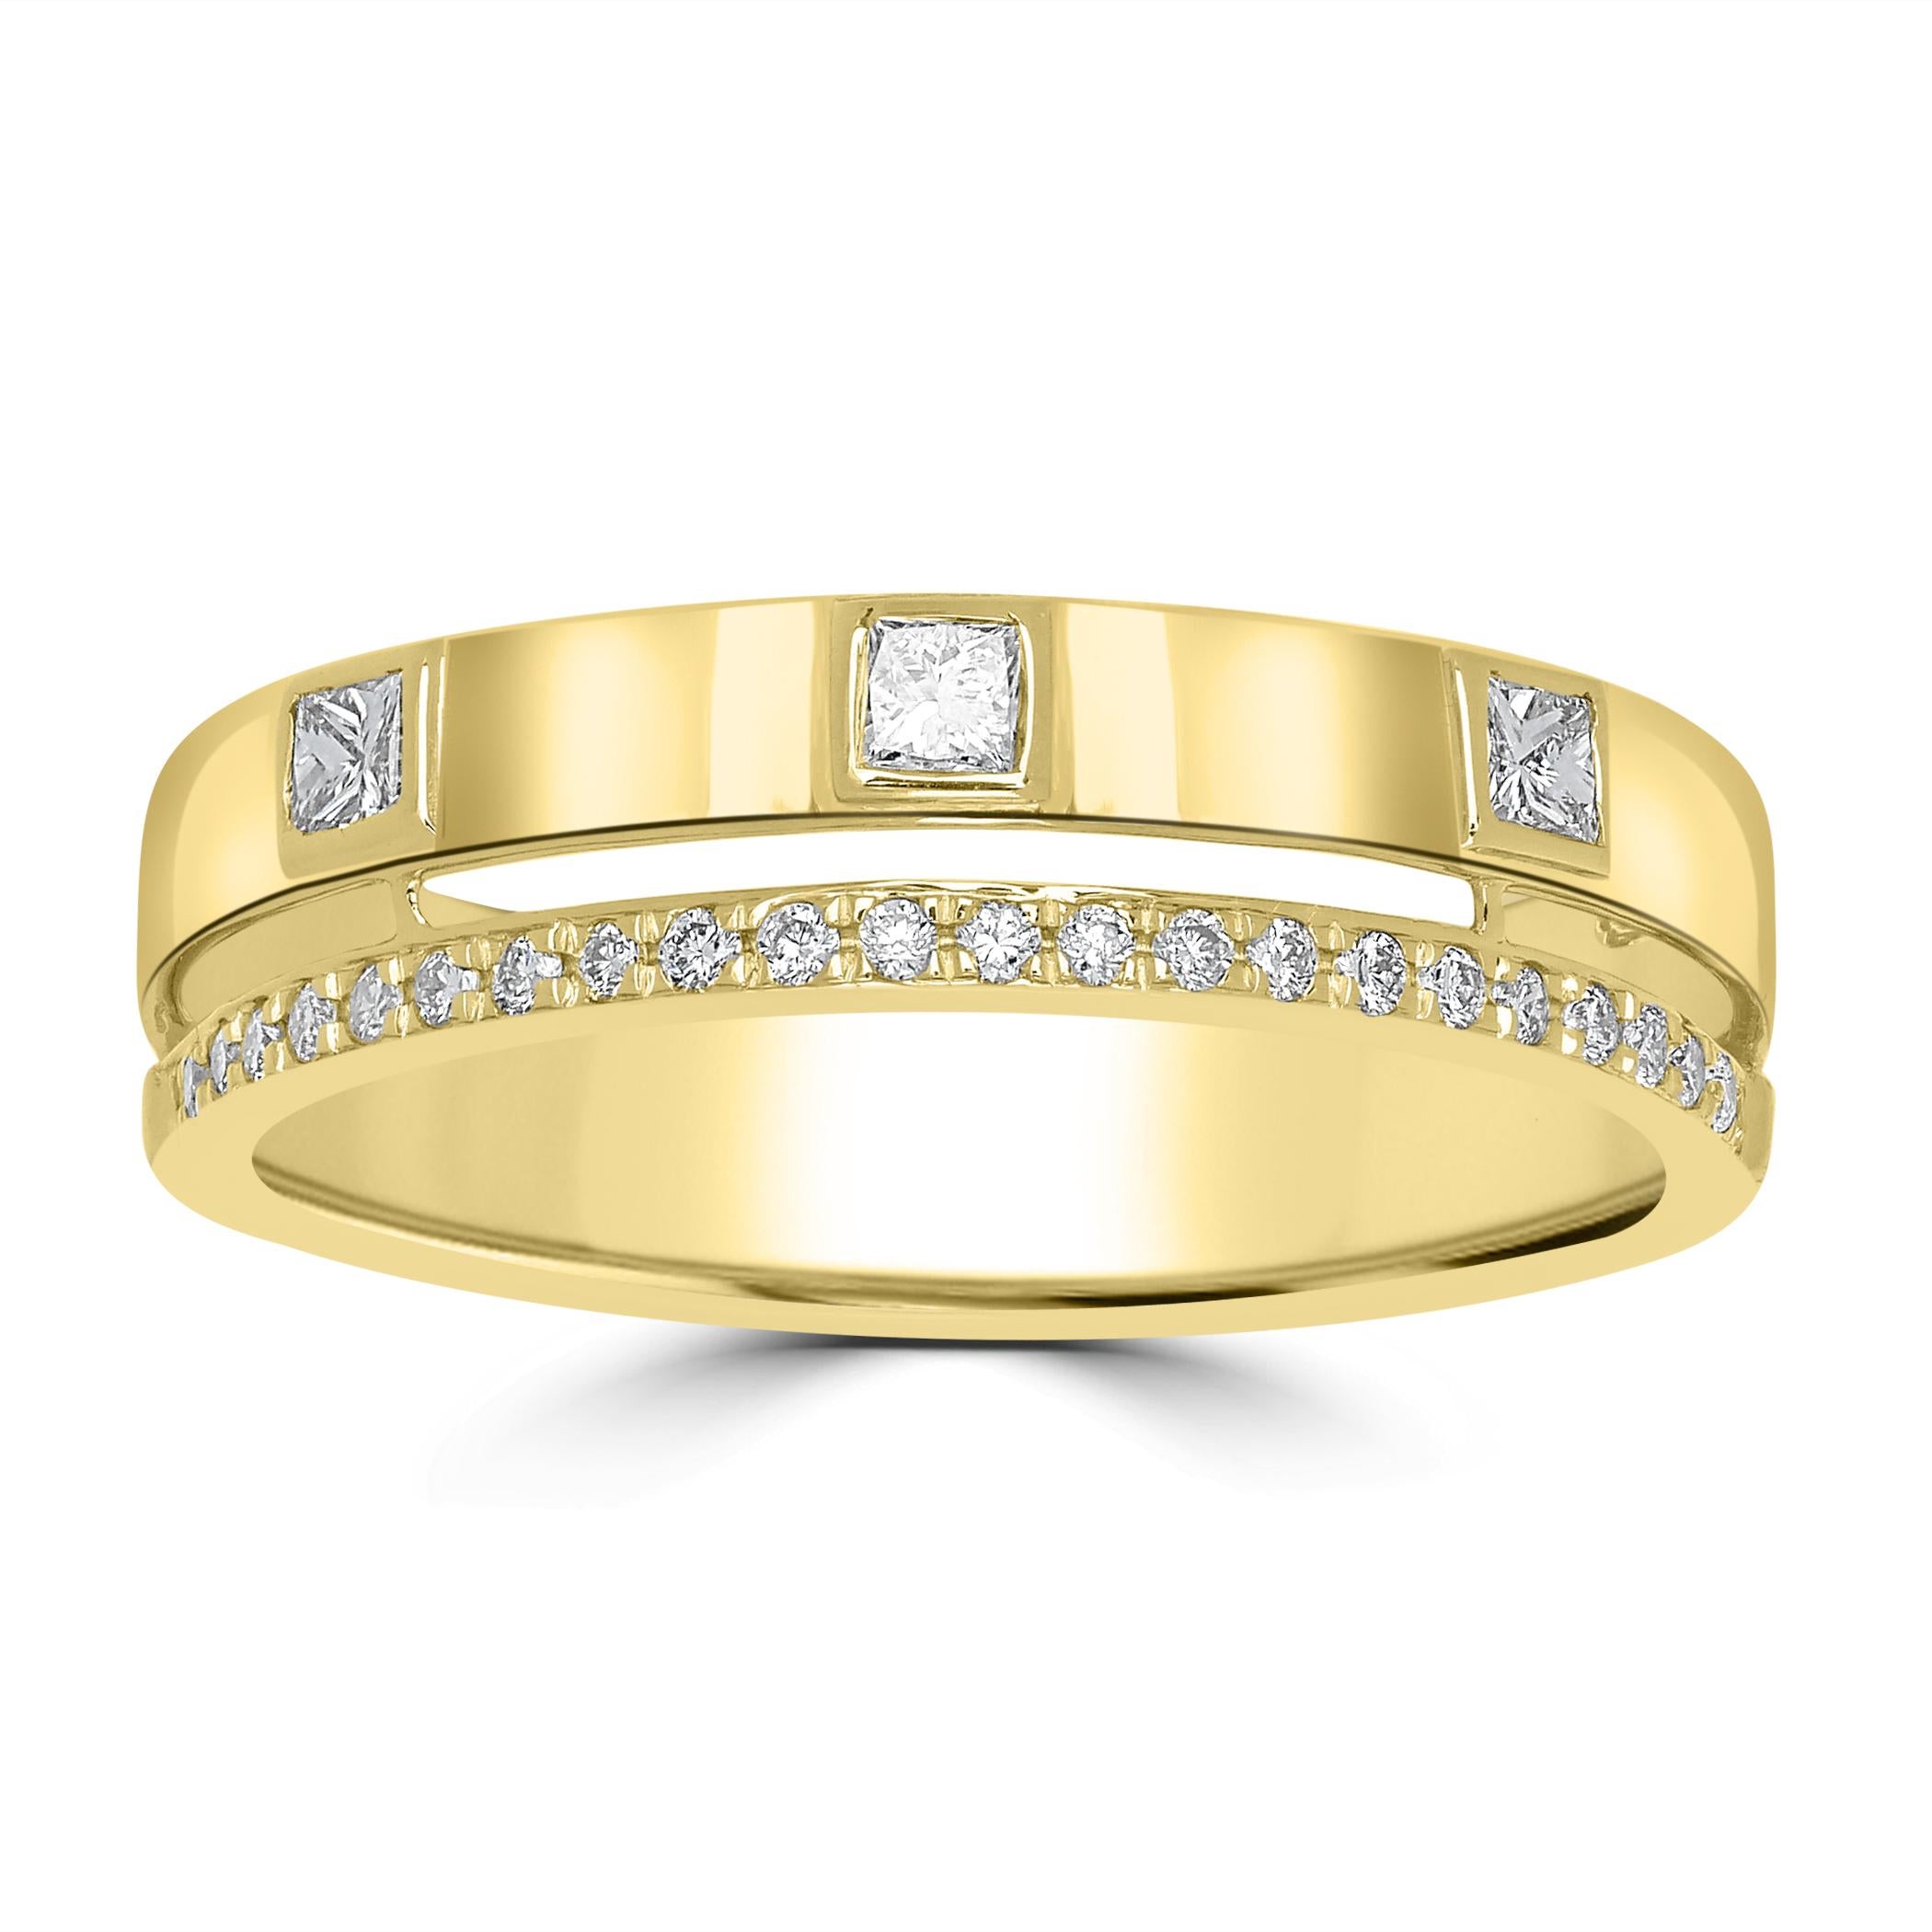 This Luxle band ring is made of 14K yellow gold and is a must-have! This ring's spaced-out 0.25 Ct round full-cut and square princess-cut diamond stations contrast flawlessly with each diamond's partnering sequence. Give it to your special someone